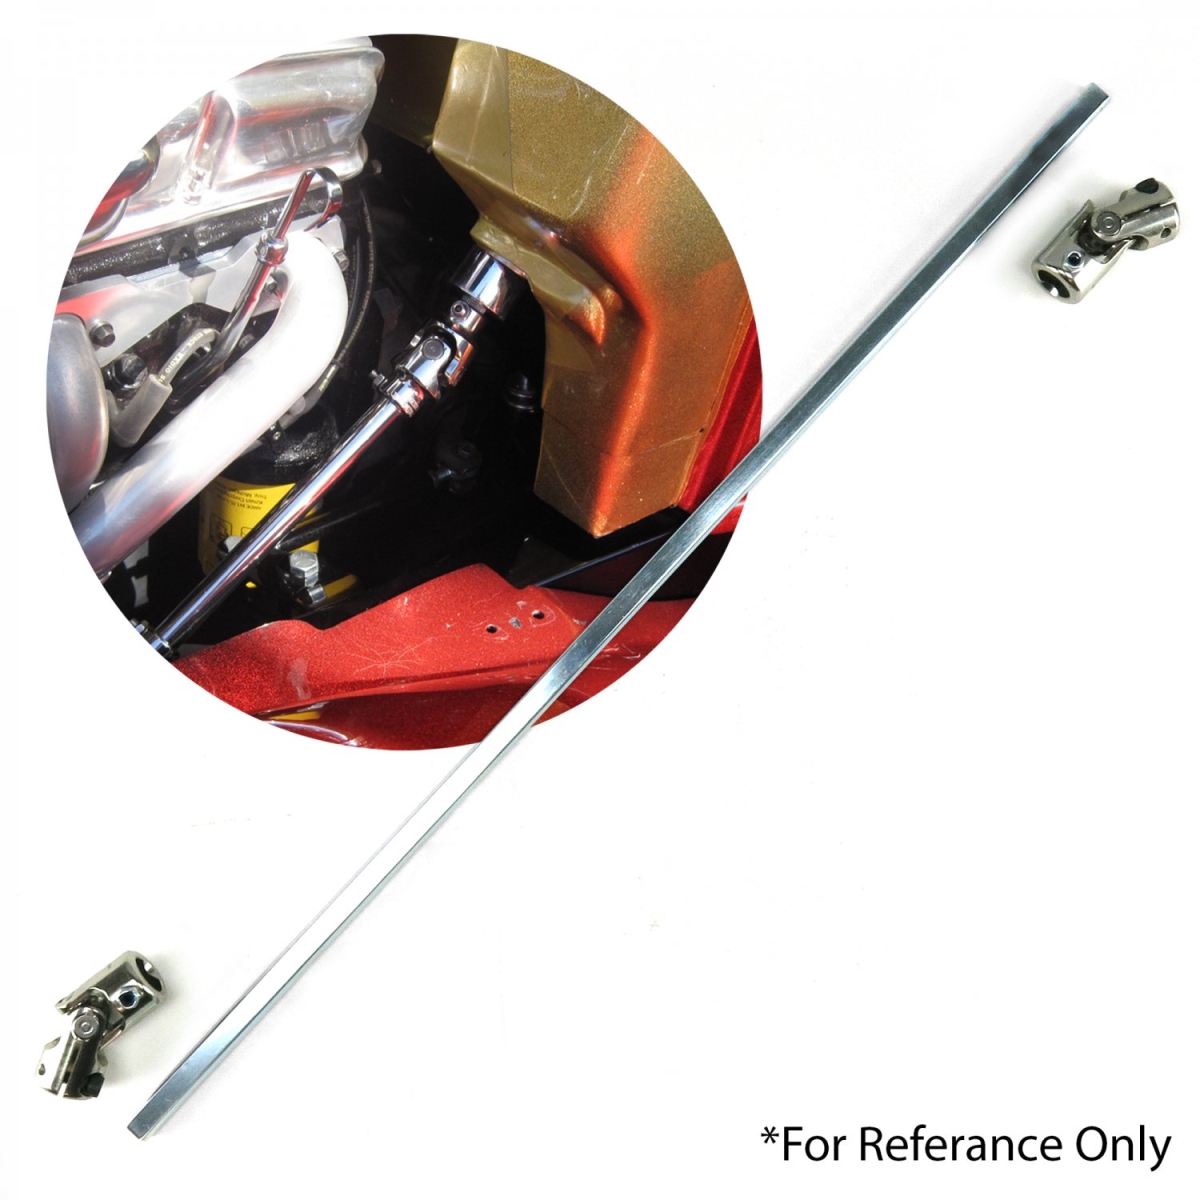 Picture of Helix Suspension Brakes & Steering 19563 1 x 17 mm Set Screw Style Steering Linkage Kit